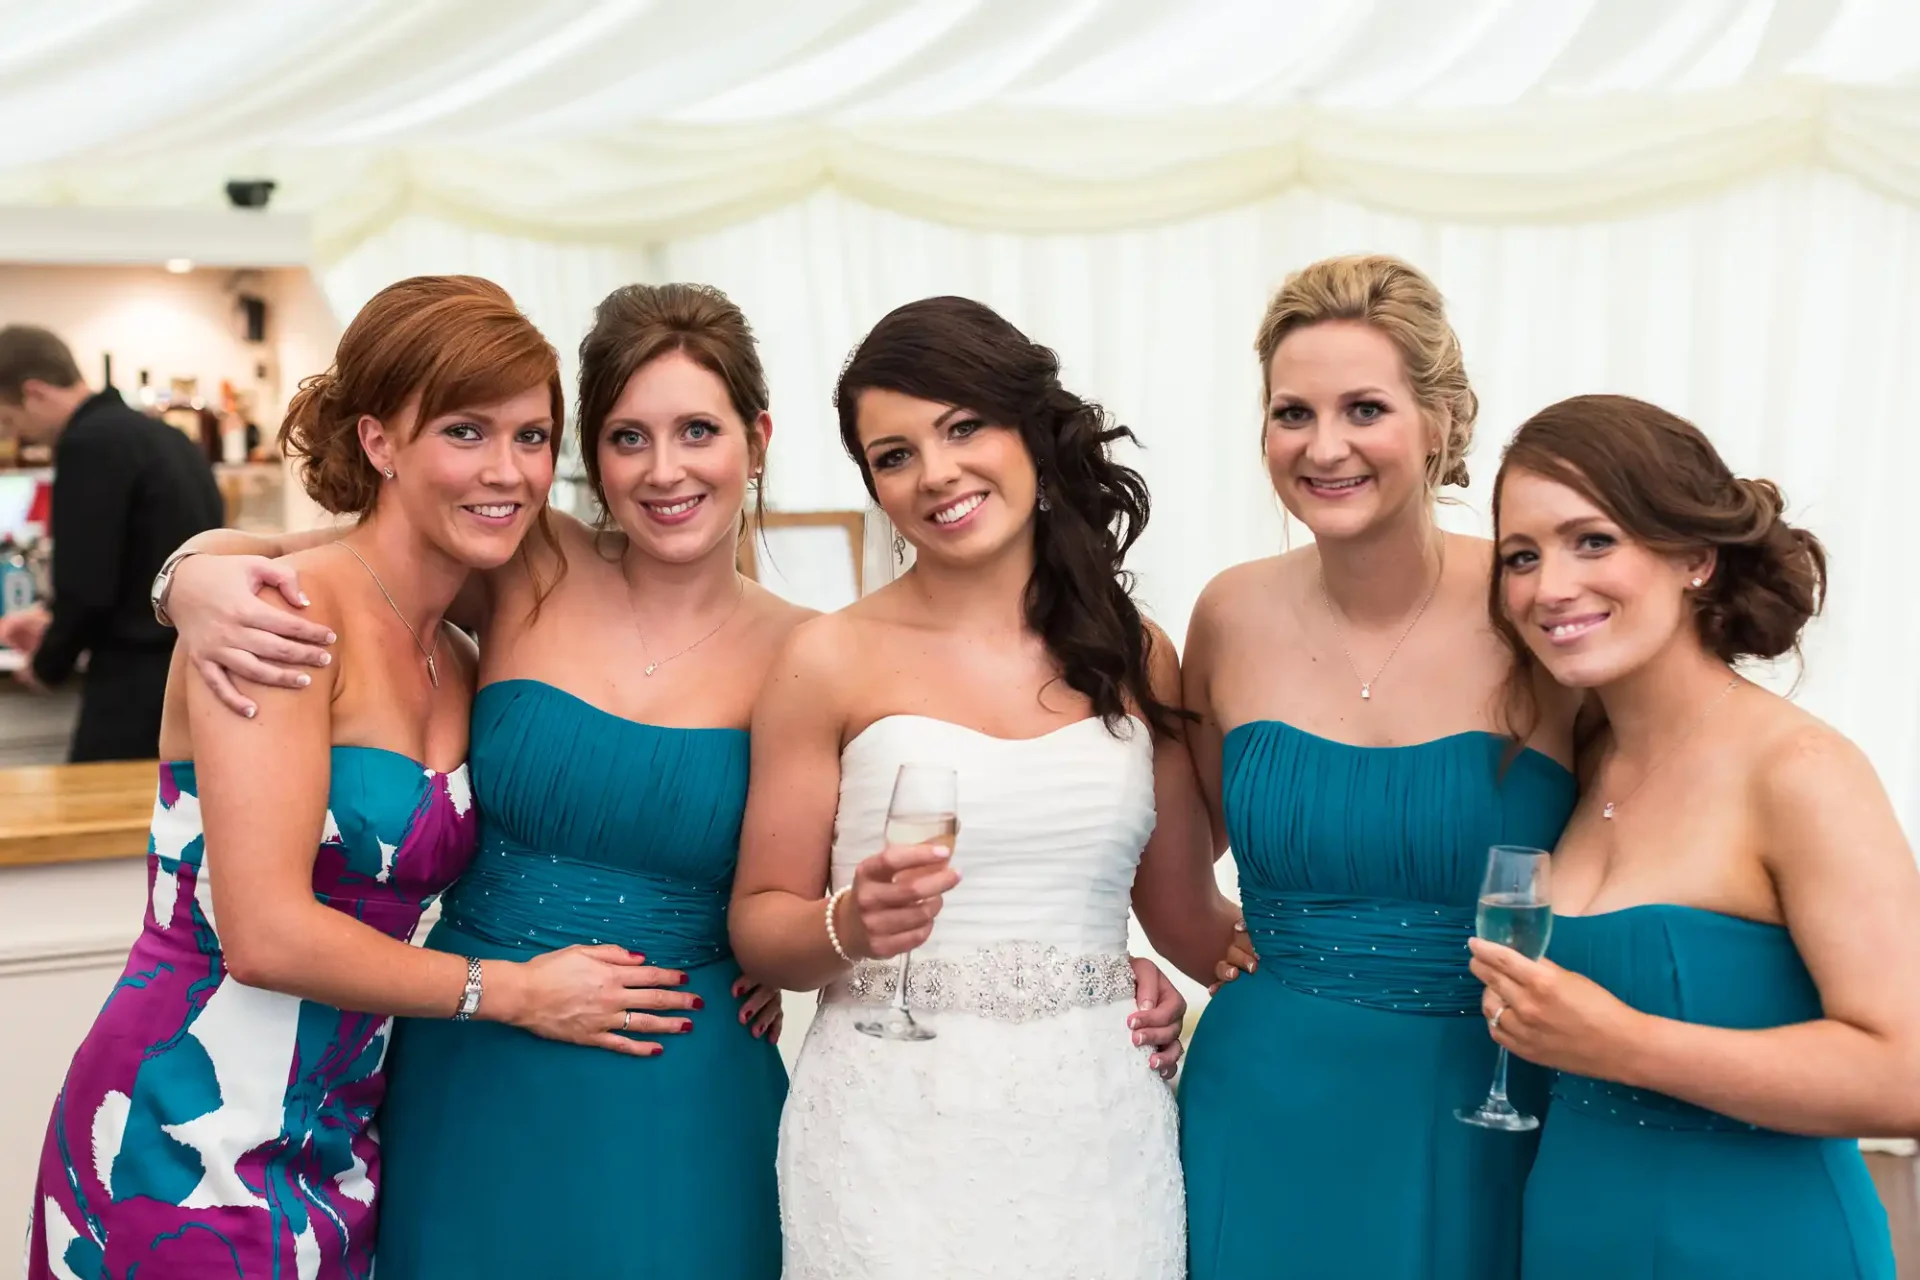 Five women at a wedding reception, smiling for the camera, four in matching blue dresses and the bride in white, holding champagne glasses.